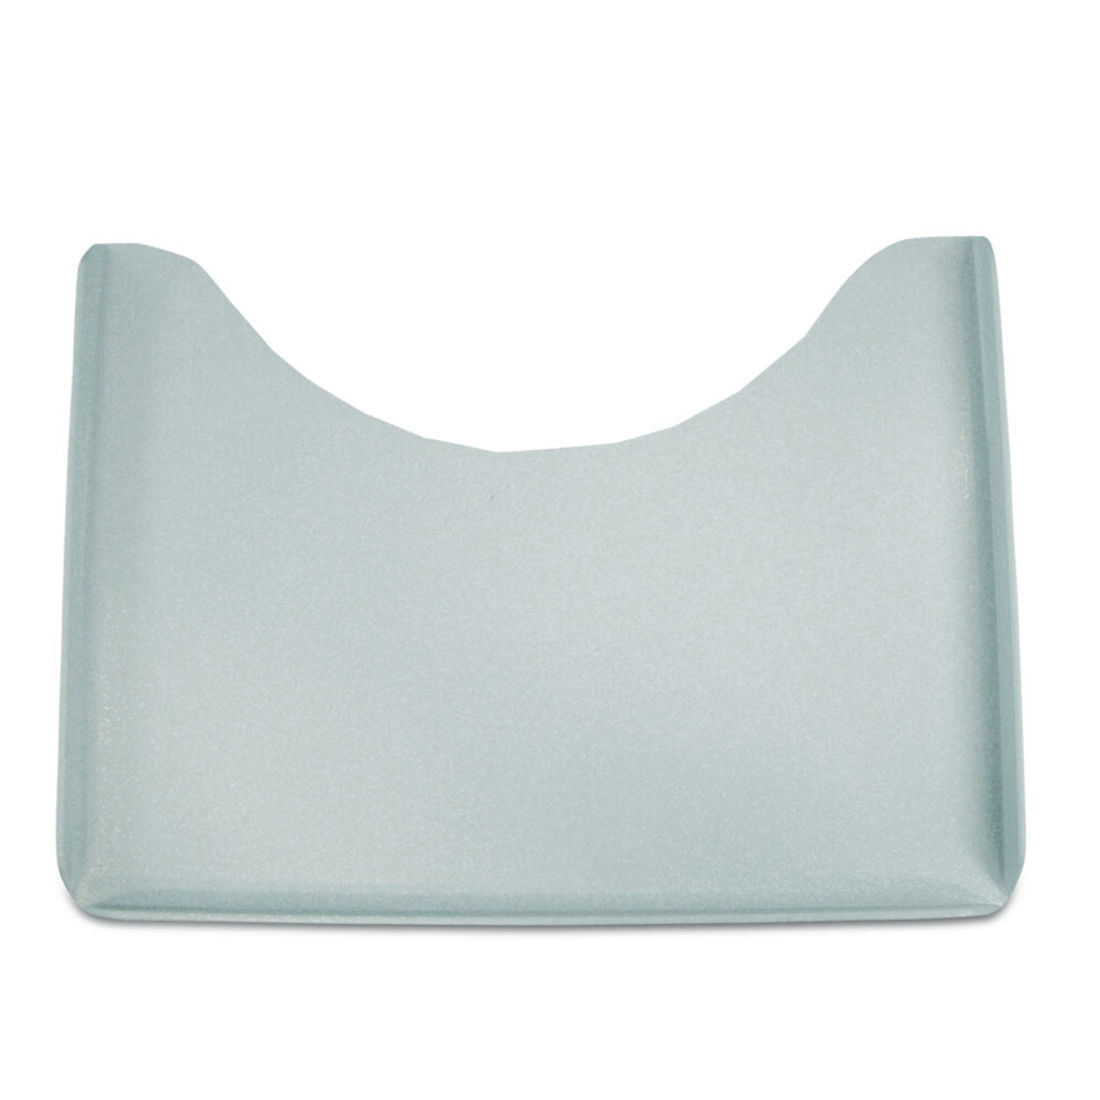 50447 Accessories trays Tray with edge shape 7.jpg